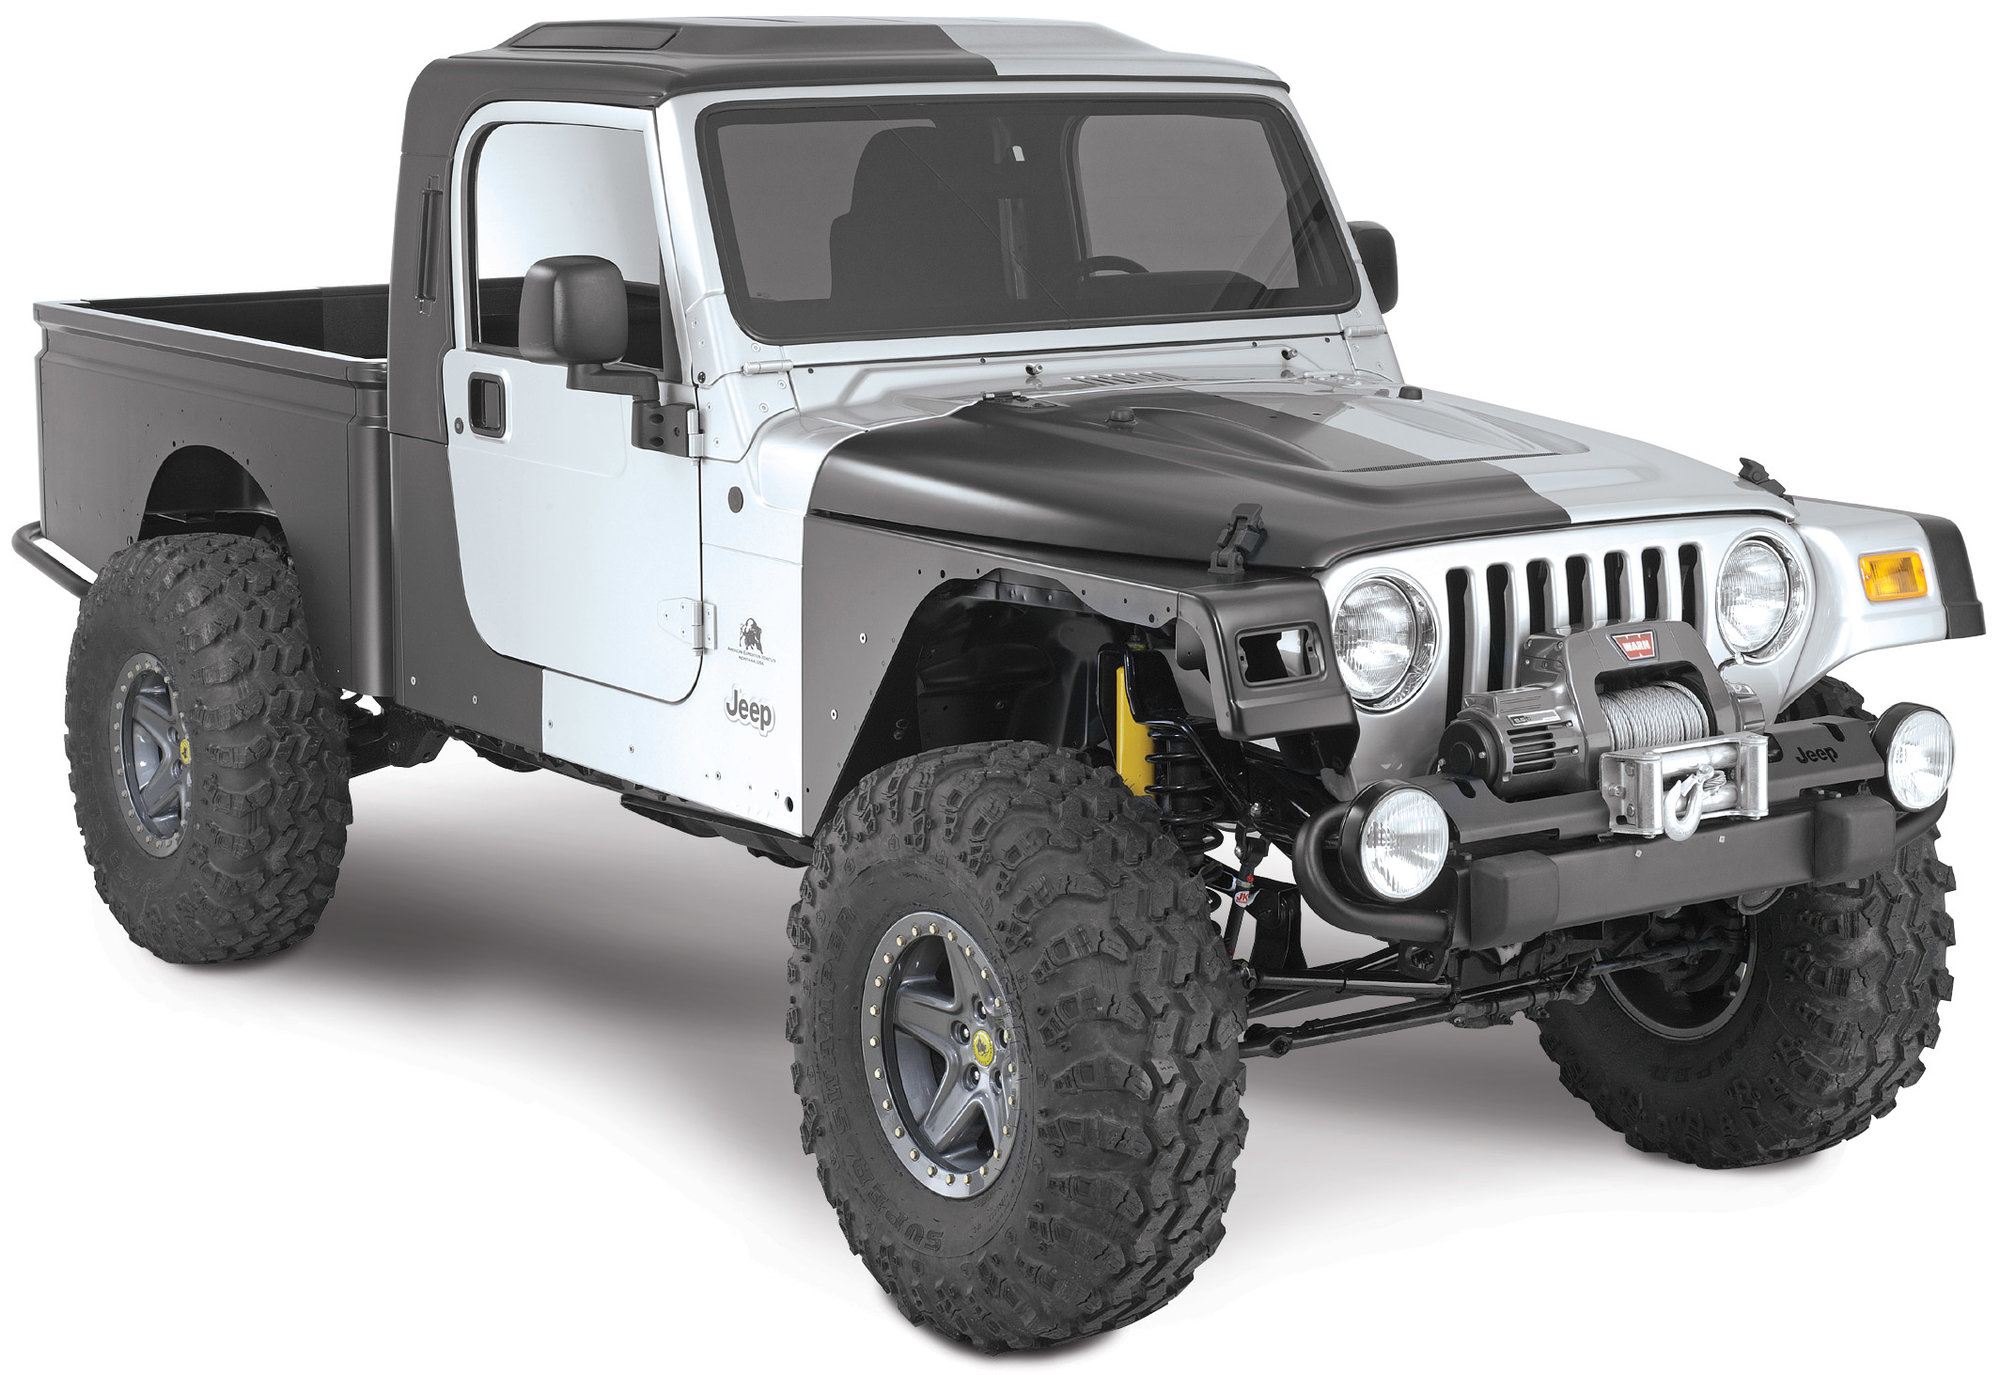 AEV IFICATE Brute Conversion Kit For 97 06 Jeep ® Wrangler.